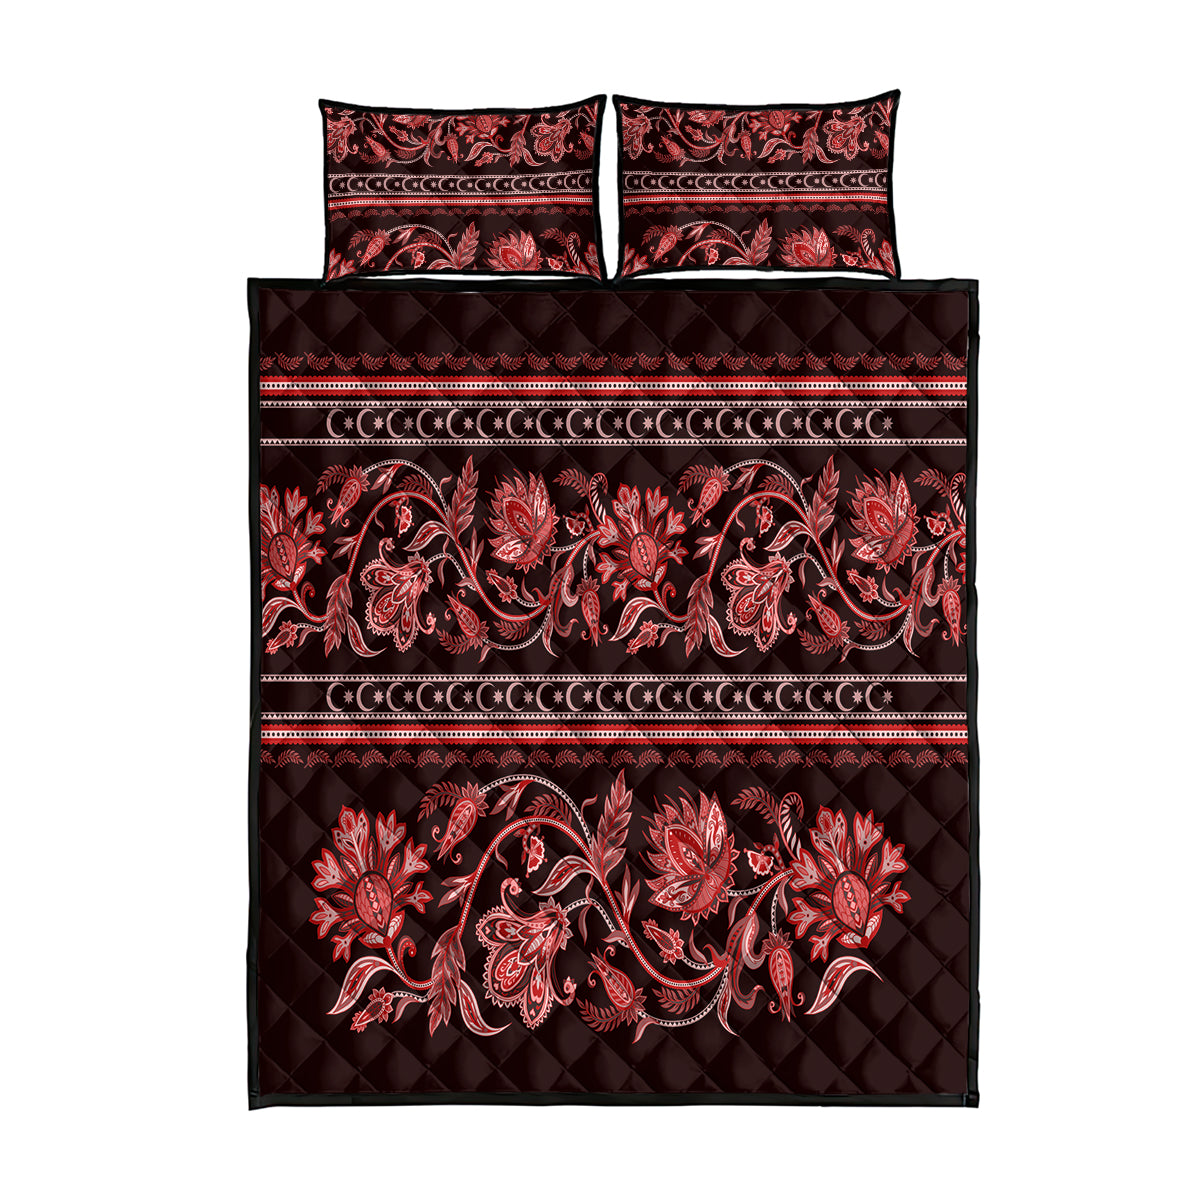 azerbaijan-quilt-bed-set-traditional-pattern-ornament-with-flowers-buta-red